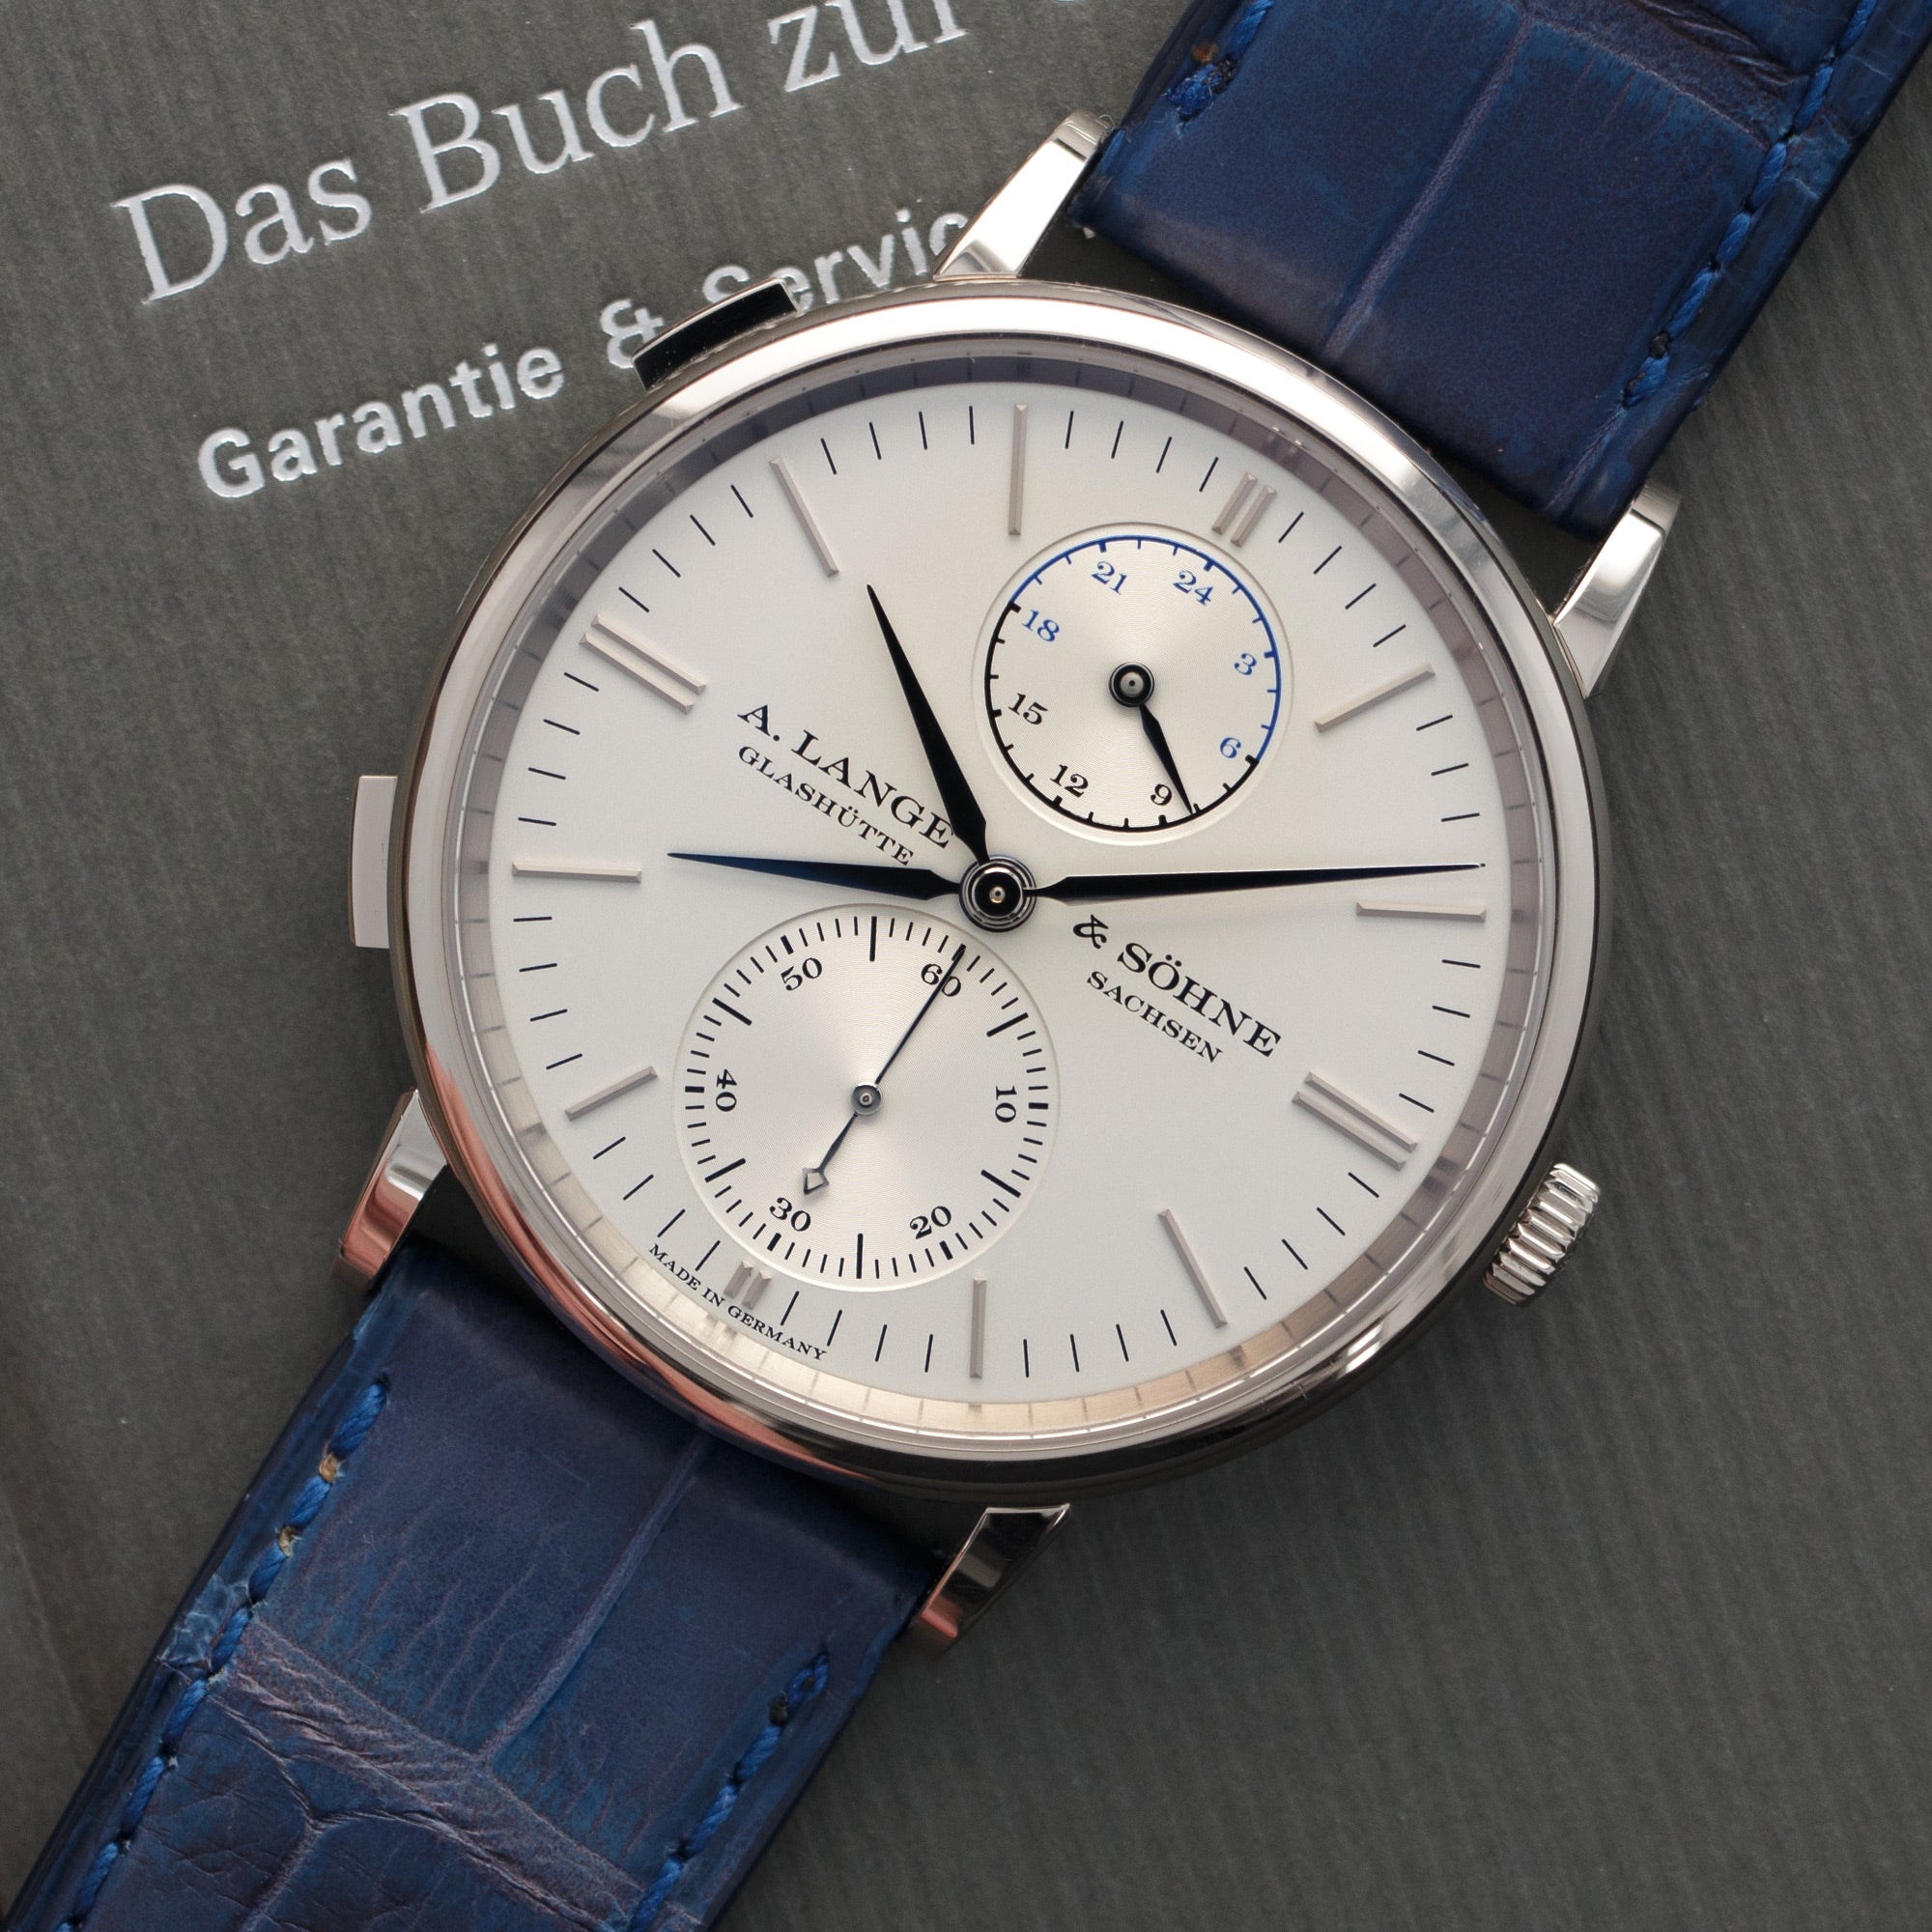 A. Lange & Sohne - A. Lange & Sohne White Gold Dual TIme Watch, Ref. 386.026 - The Keystone Watches